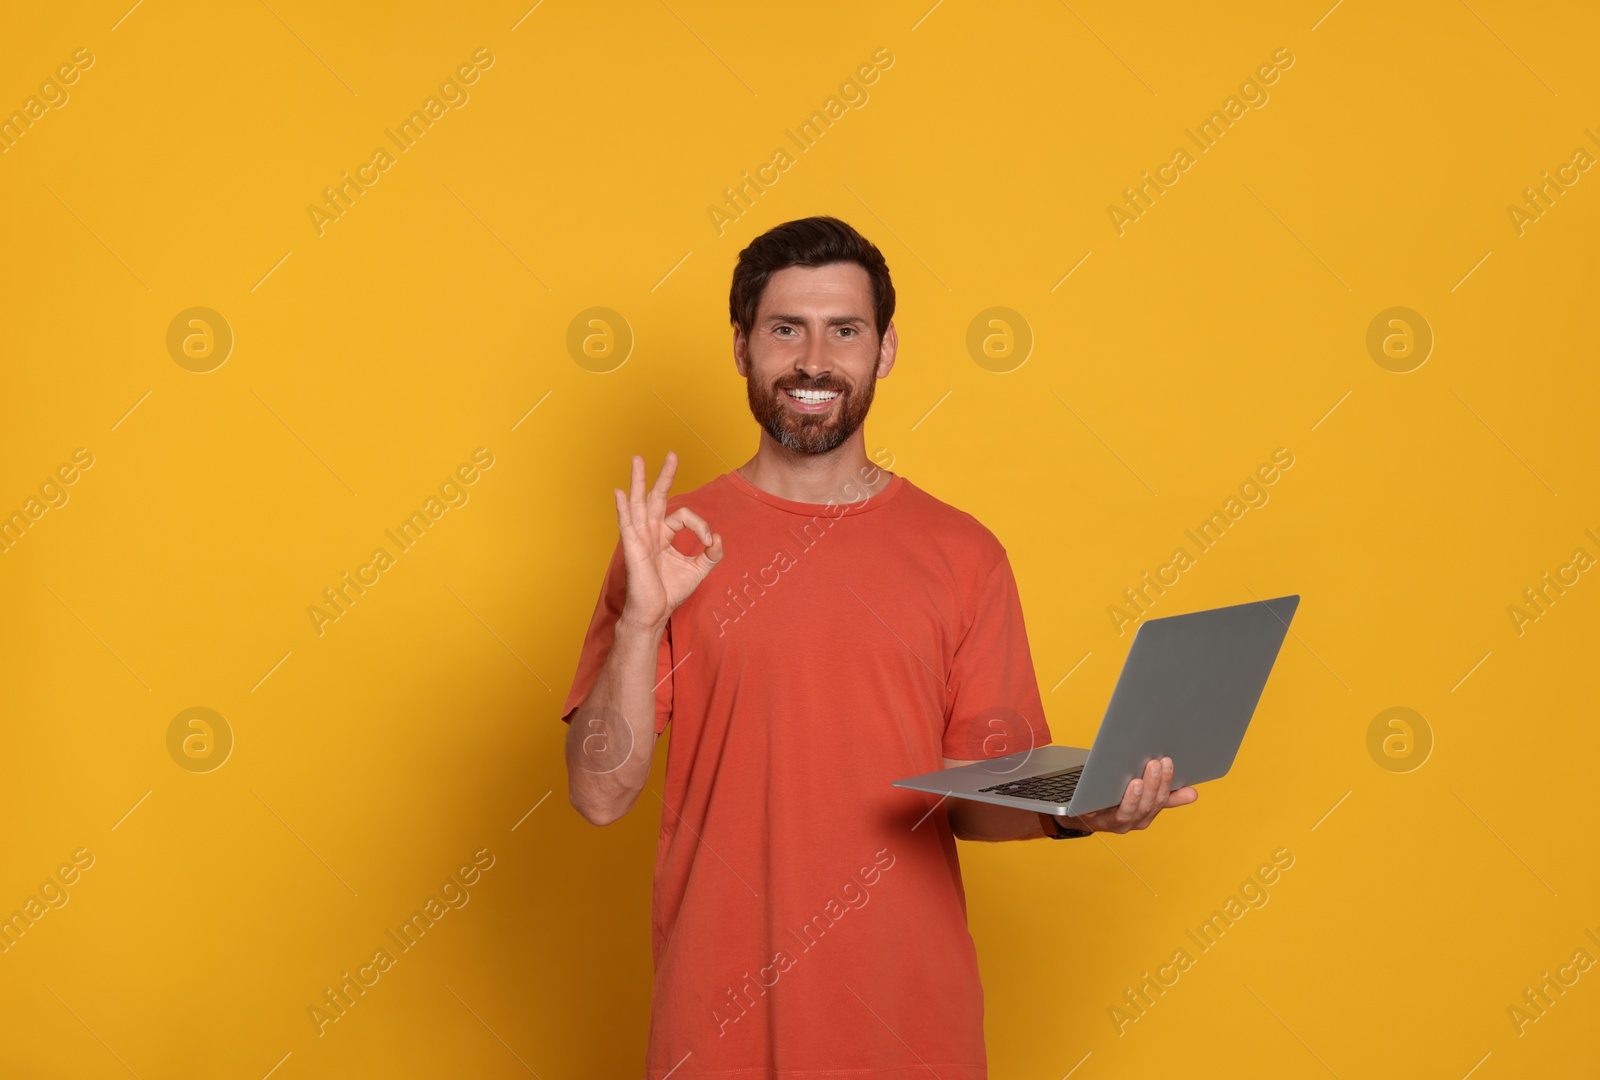 Photo of Handsome man with laptop showing OK gesture on orange background